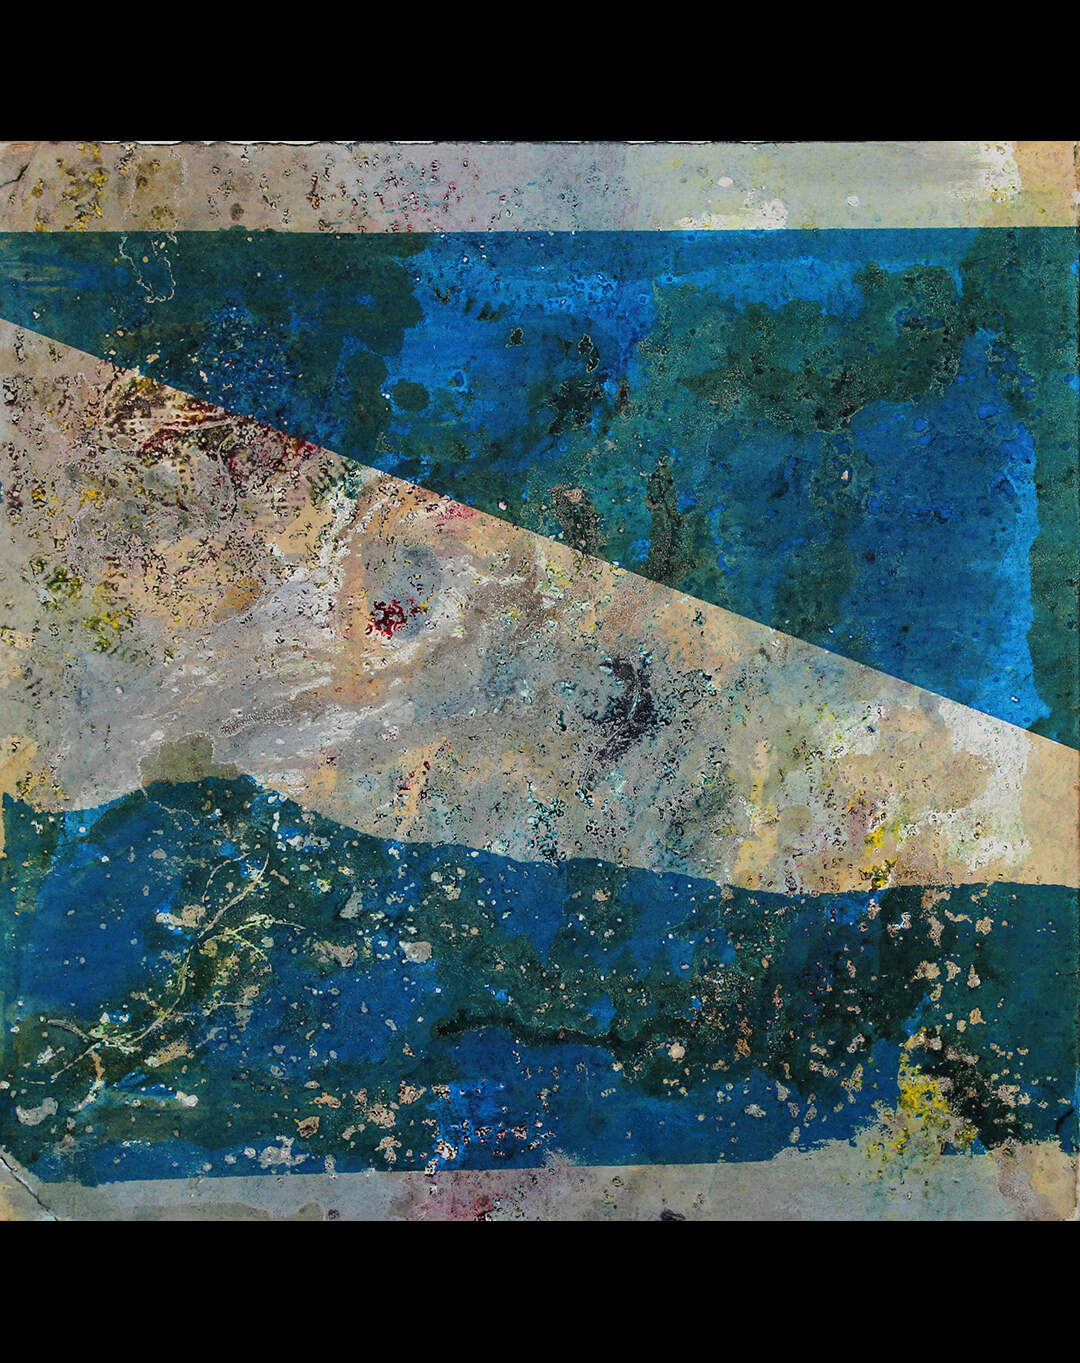 Mixed Media Collograph on Fabriano 30 cm x 30 cm unframed 47 cm x47 cm framed